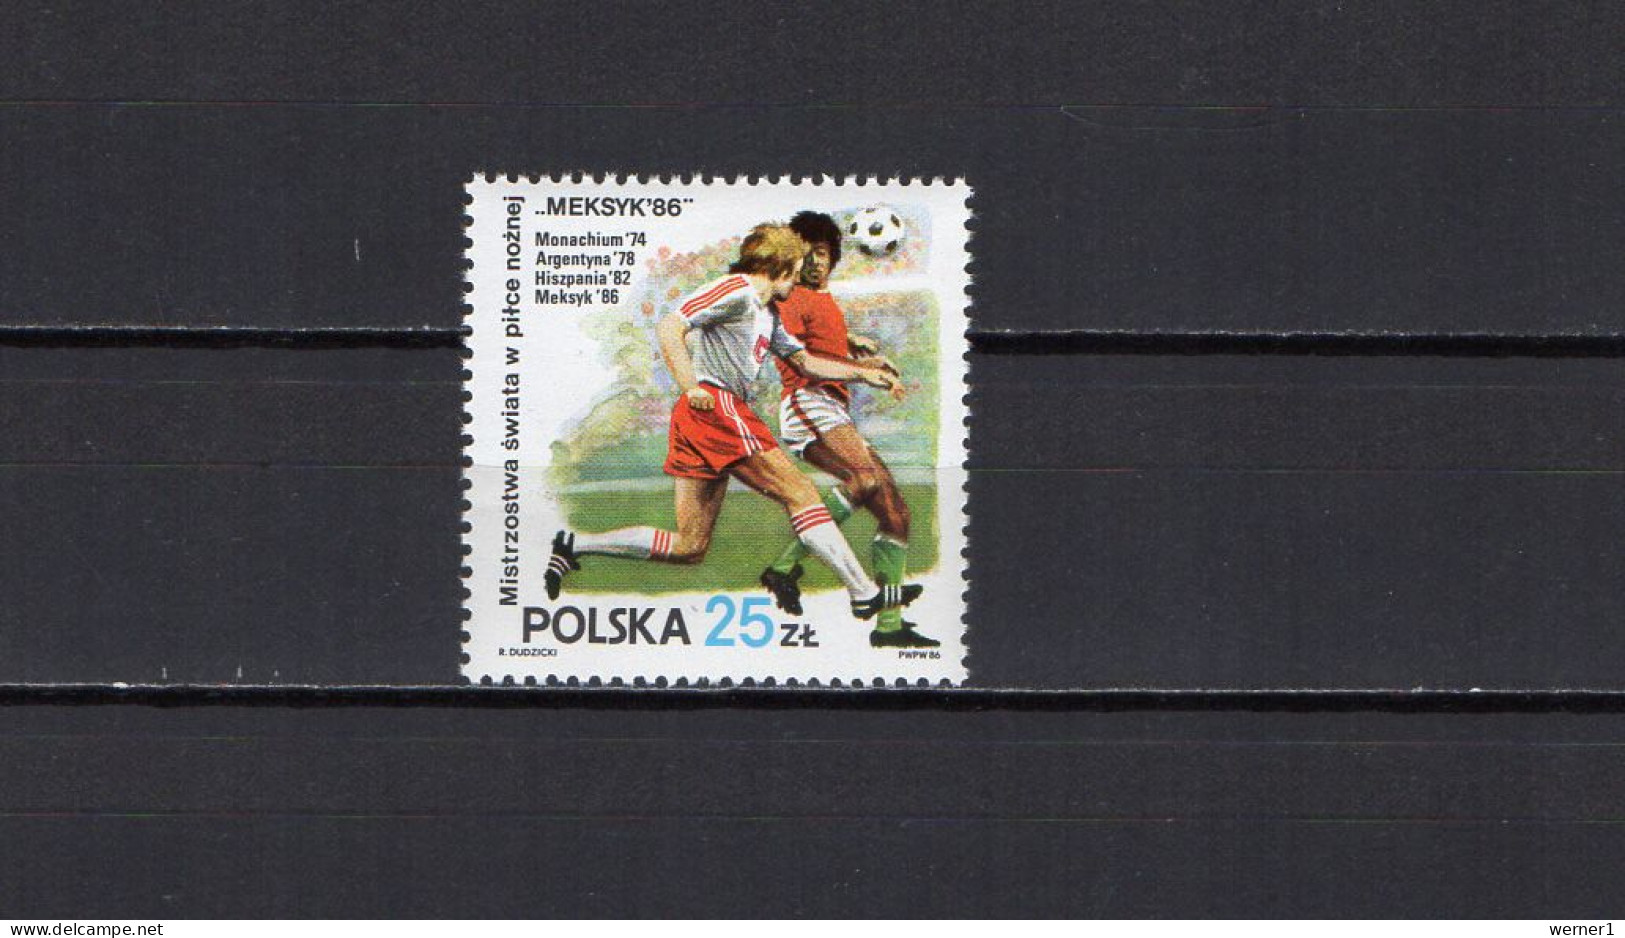 Poland 1986 Football Soccer World Cup Stamp MNH - 1986 – Mexique